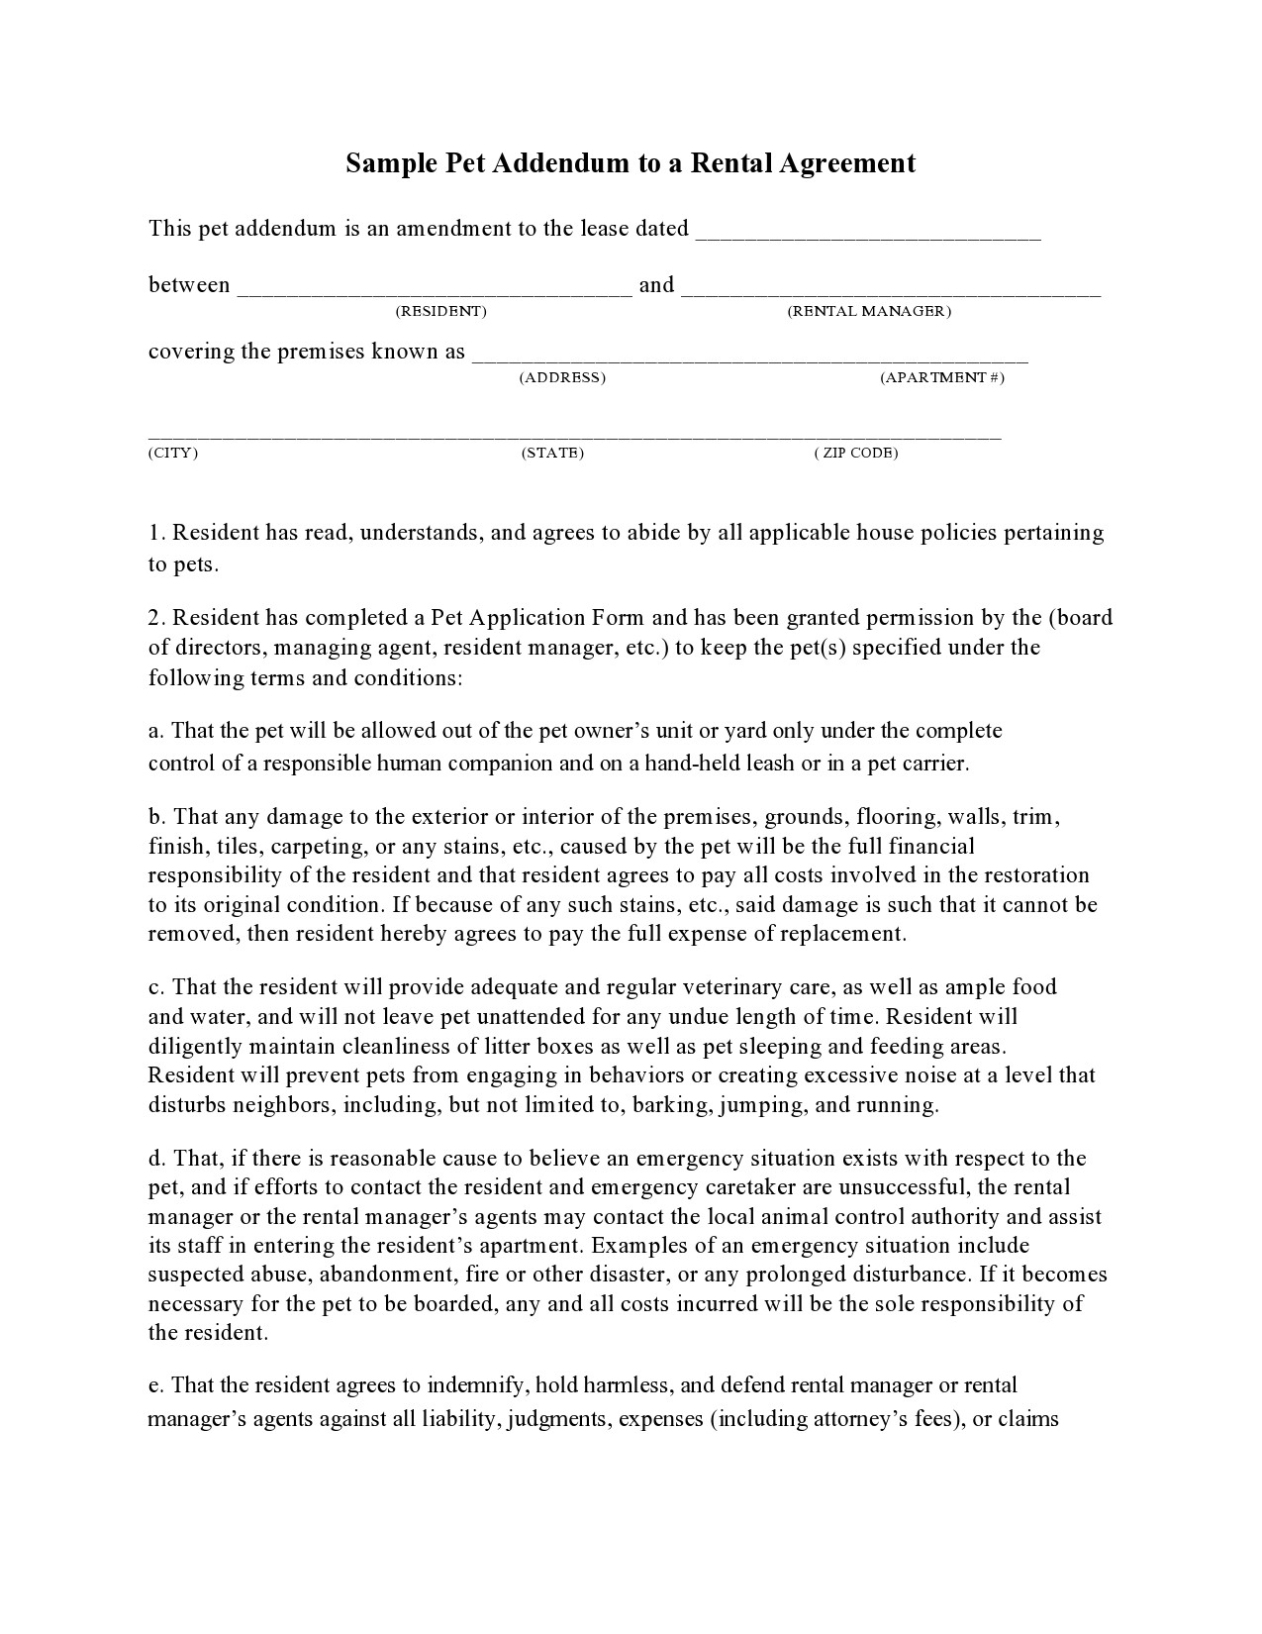 39 Free Pet Addendum Forms To Rental Agreement [Doc, Pdf] With Pet Addendum To Lease Agreement Template